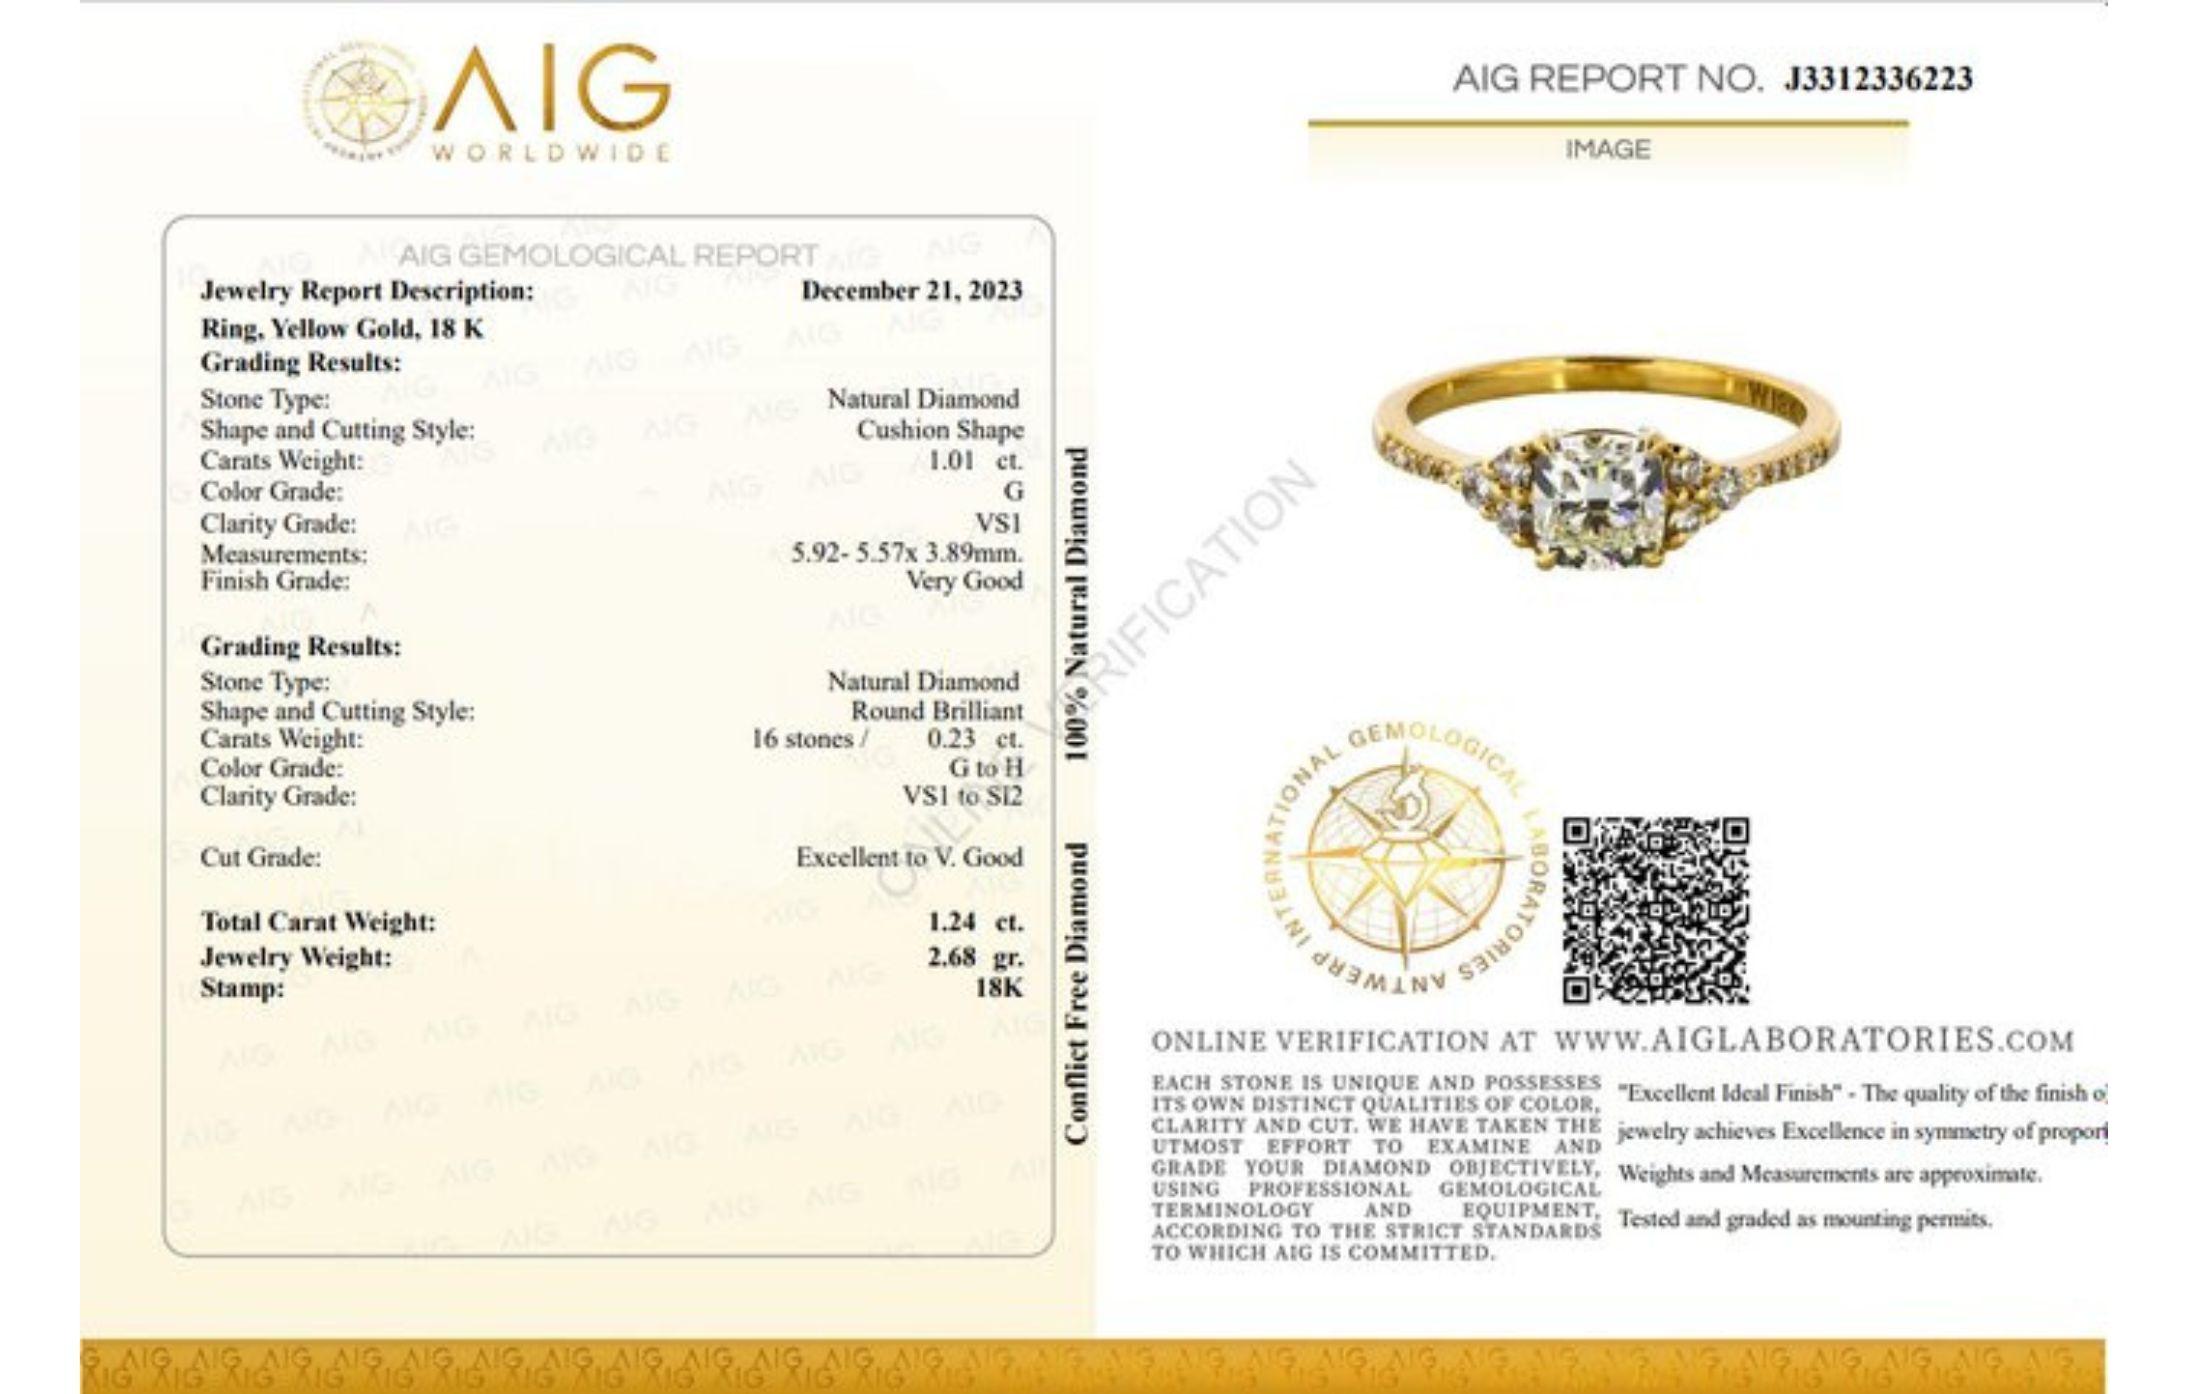 18K Yellow Gold Pave Diamond Ring with a Captivating 1.01ct Cushion-cut Diamond 1